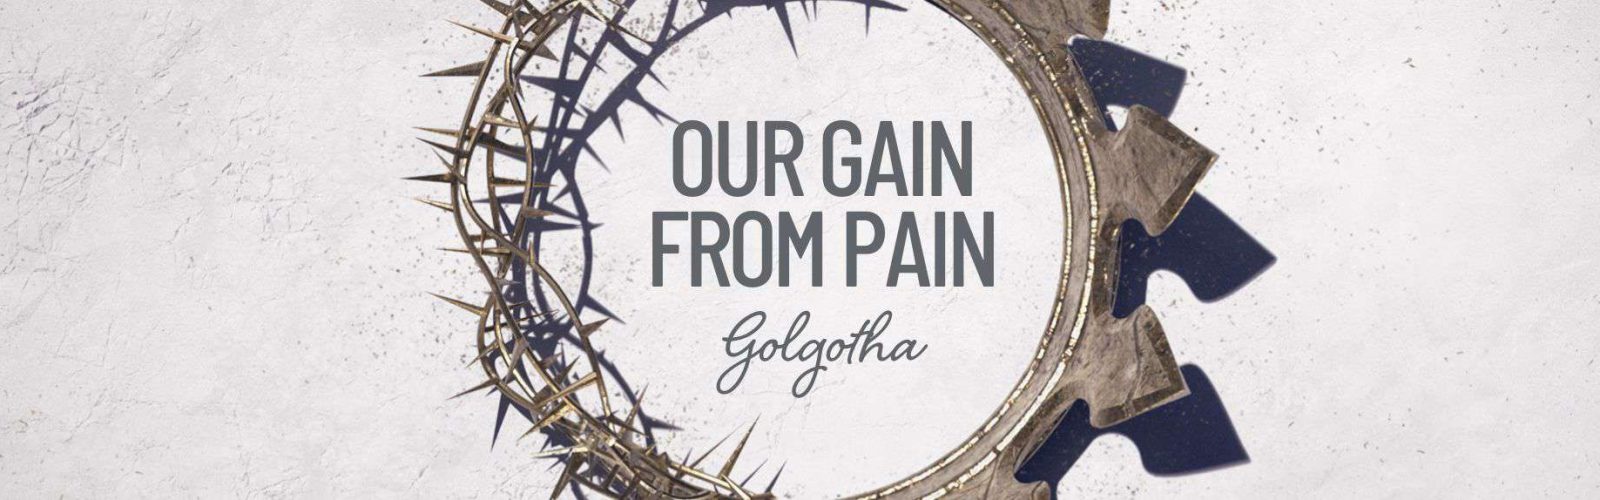 Our gain from pain Berwick Church of Christ